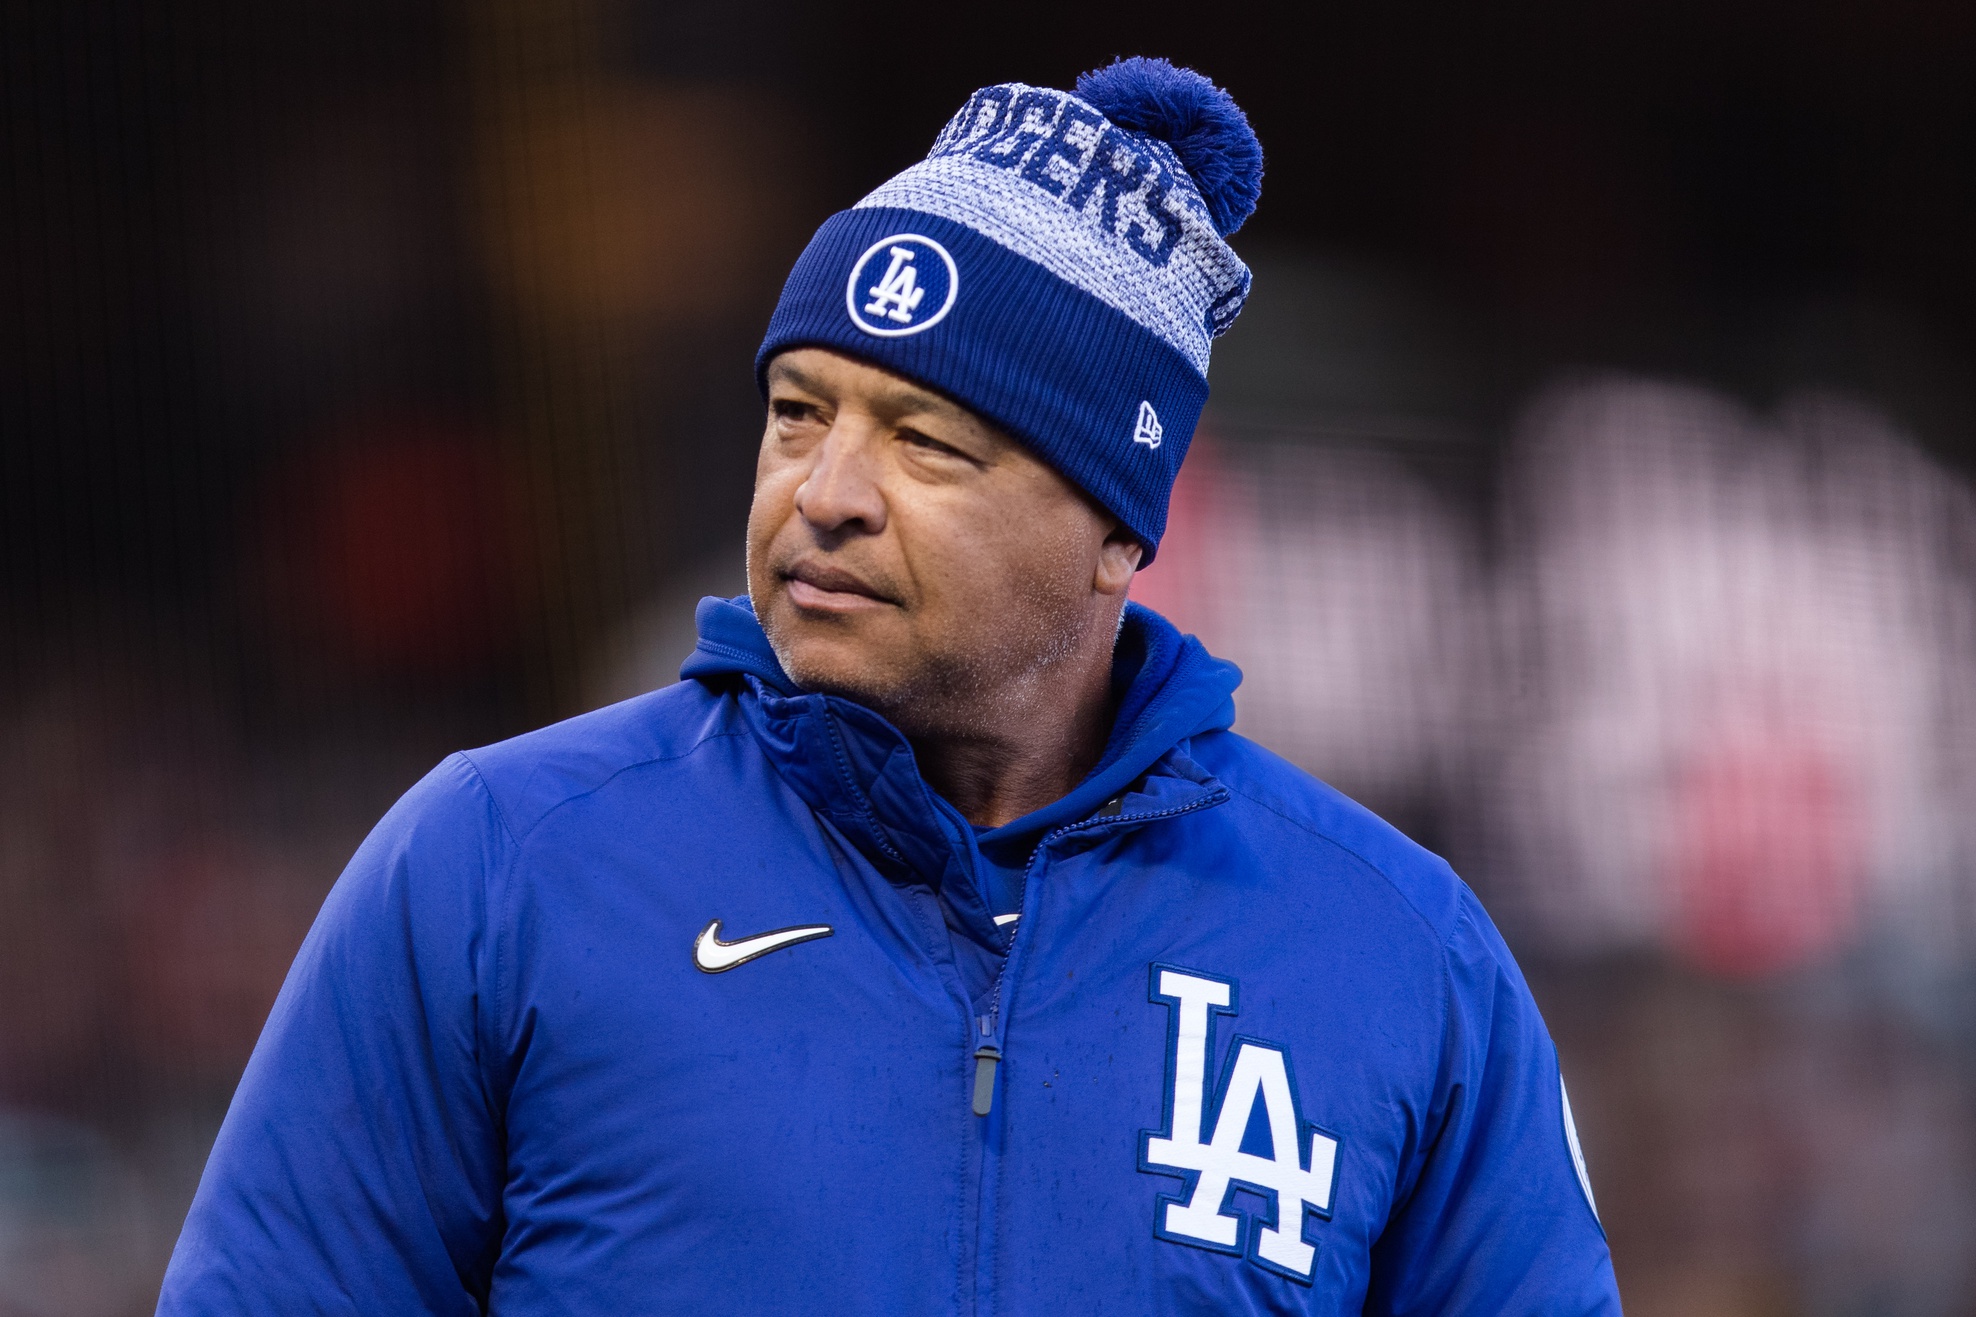 Dodgers’ Dave Roberts Gives Thoughts On Recent Hot Streak